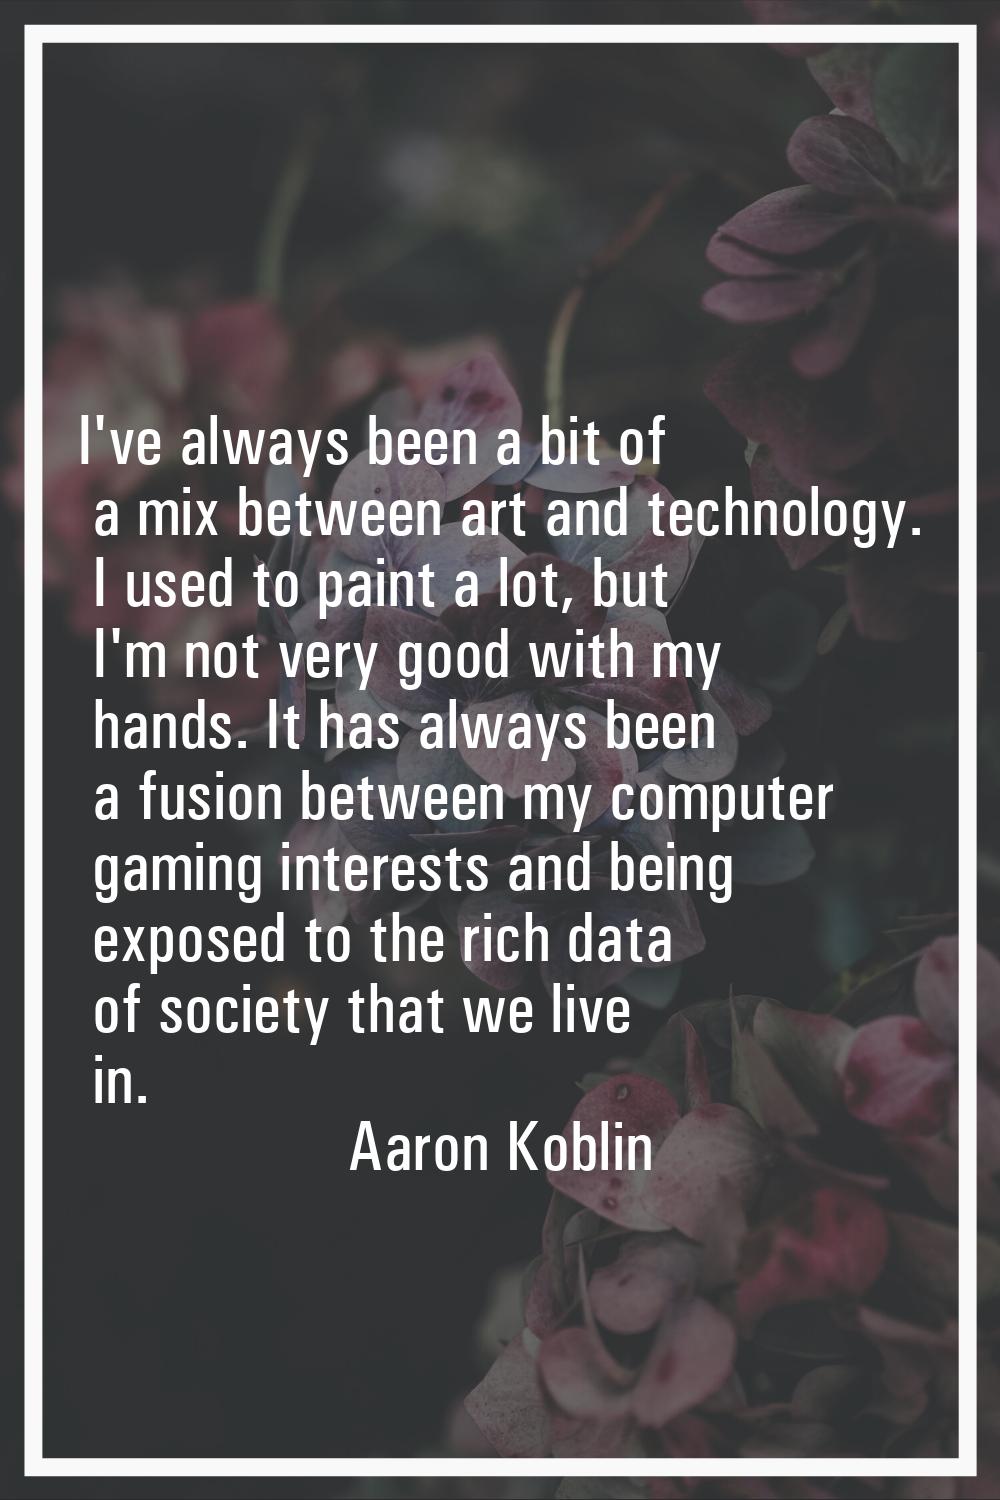 I've always been a bit of a mix between art and technology. I used to paint a lot, but I'm not very